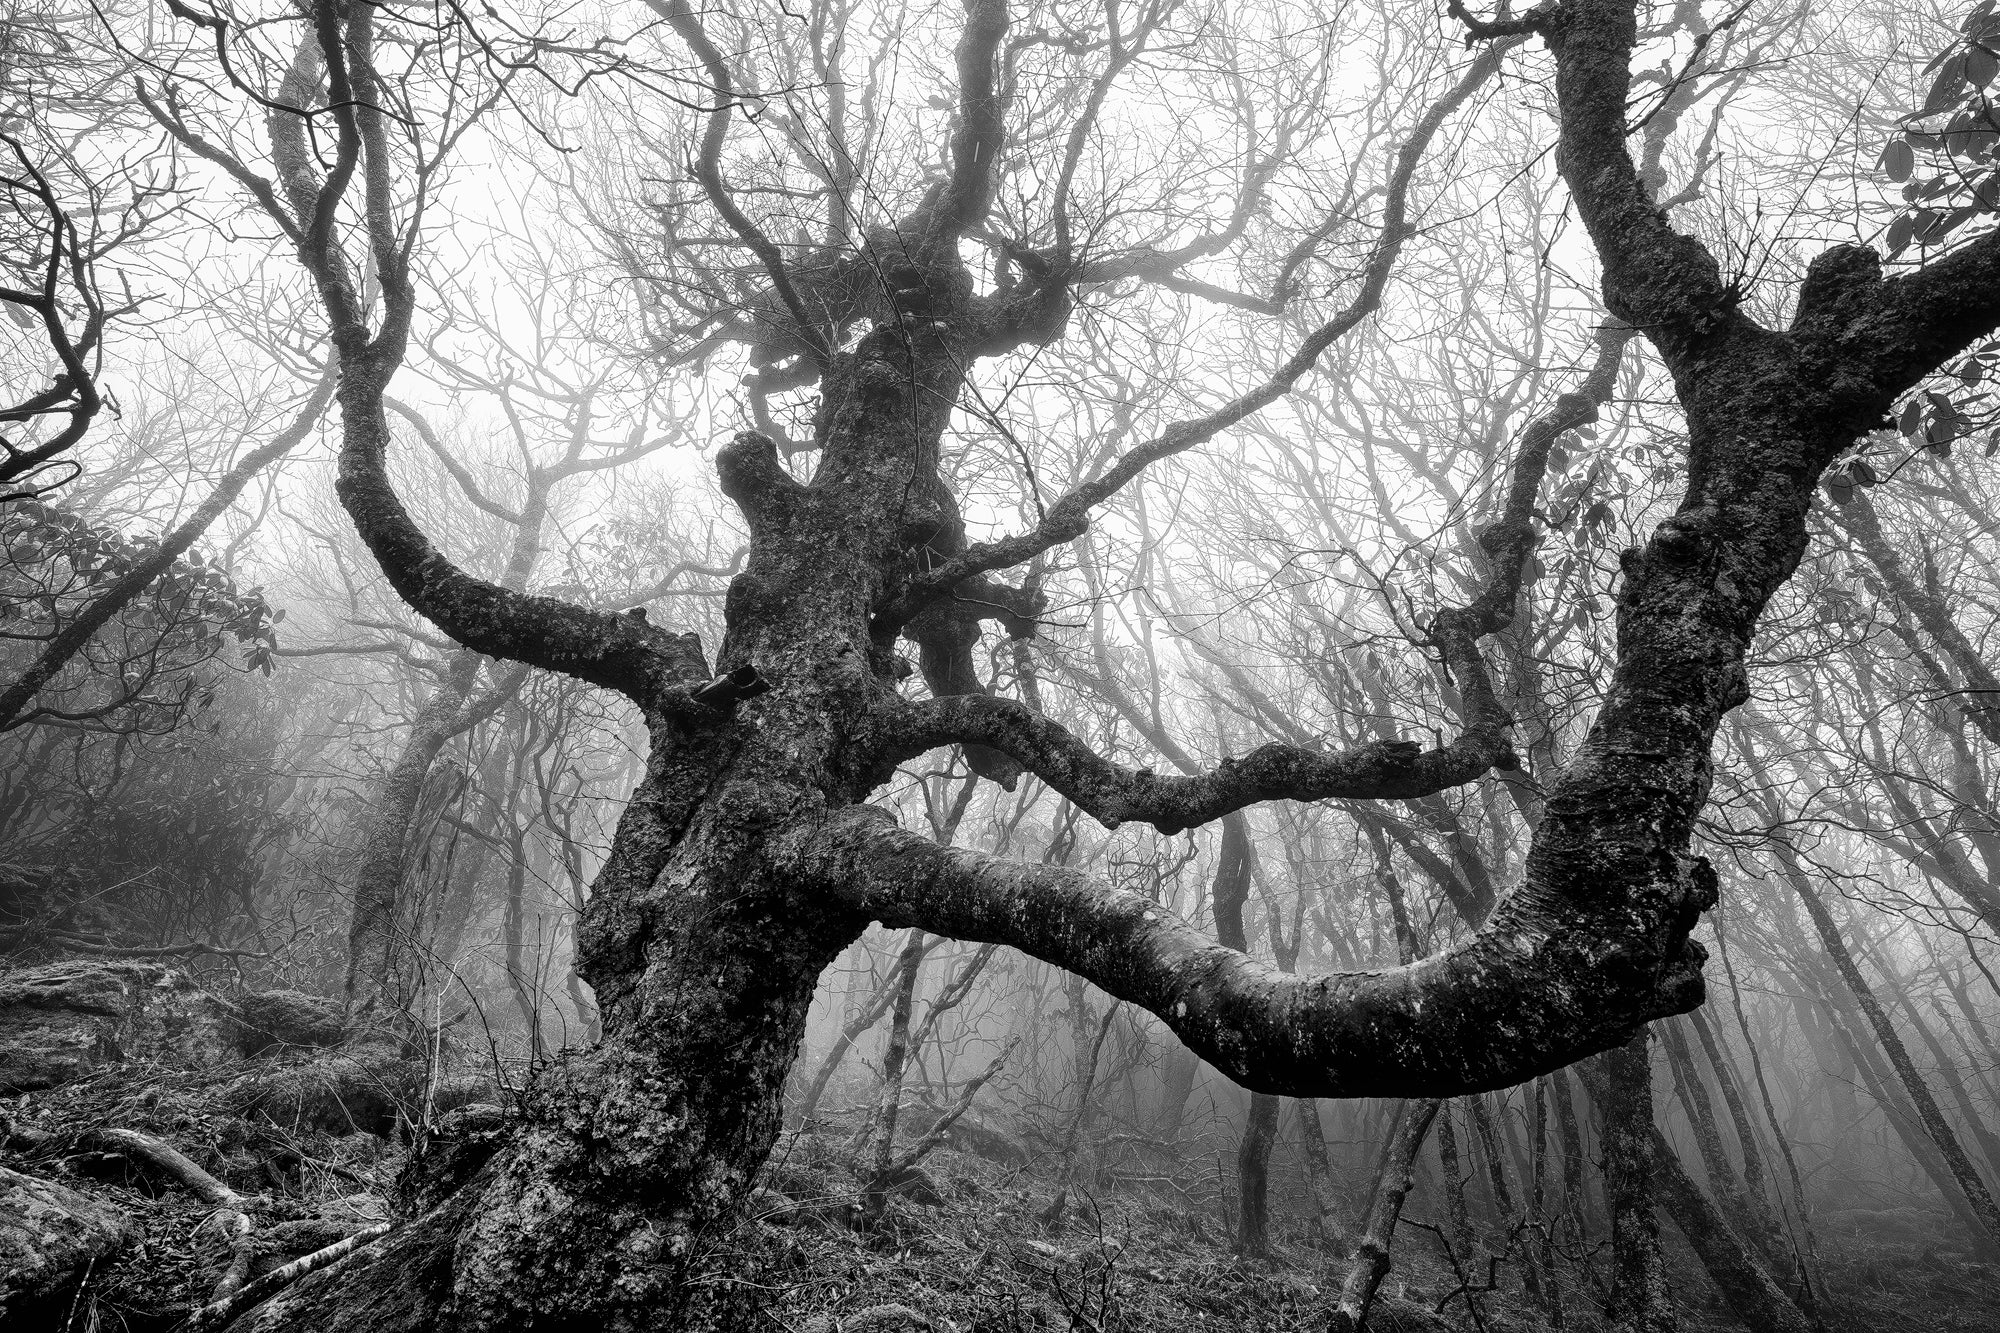 Gnarly Old Tree in the Fog - Black and white landscape photograph by Keith Dotson. Click to buy a fine art print.